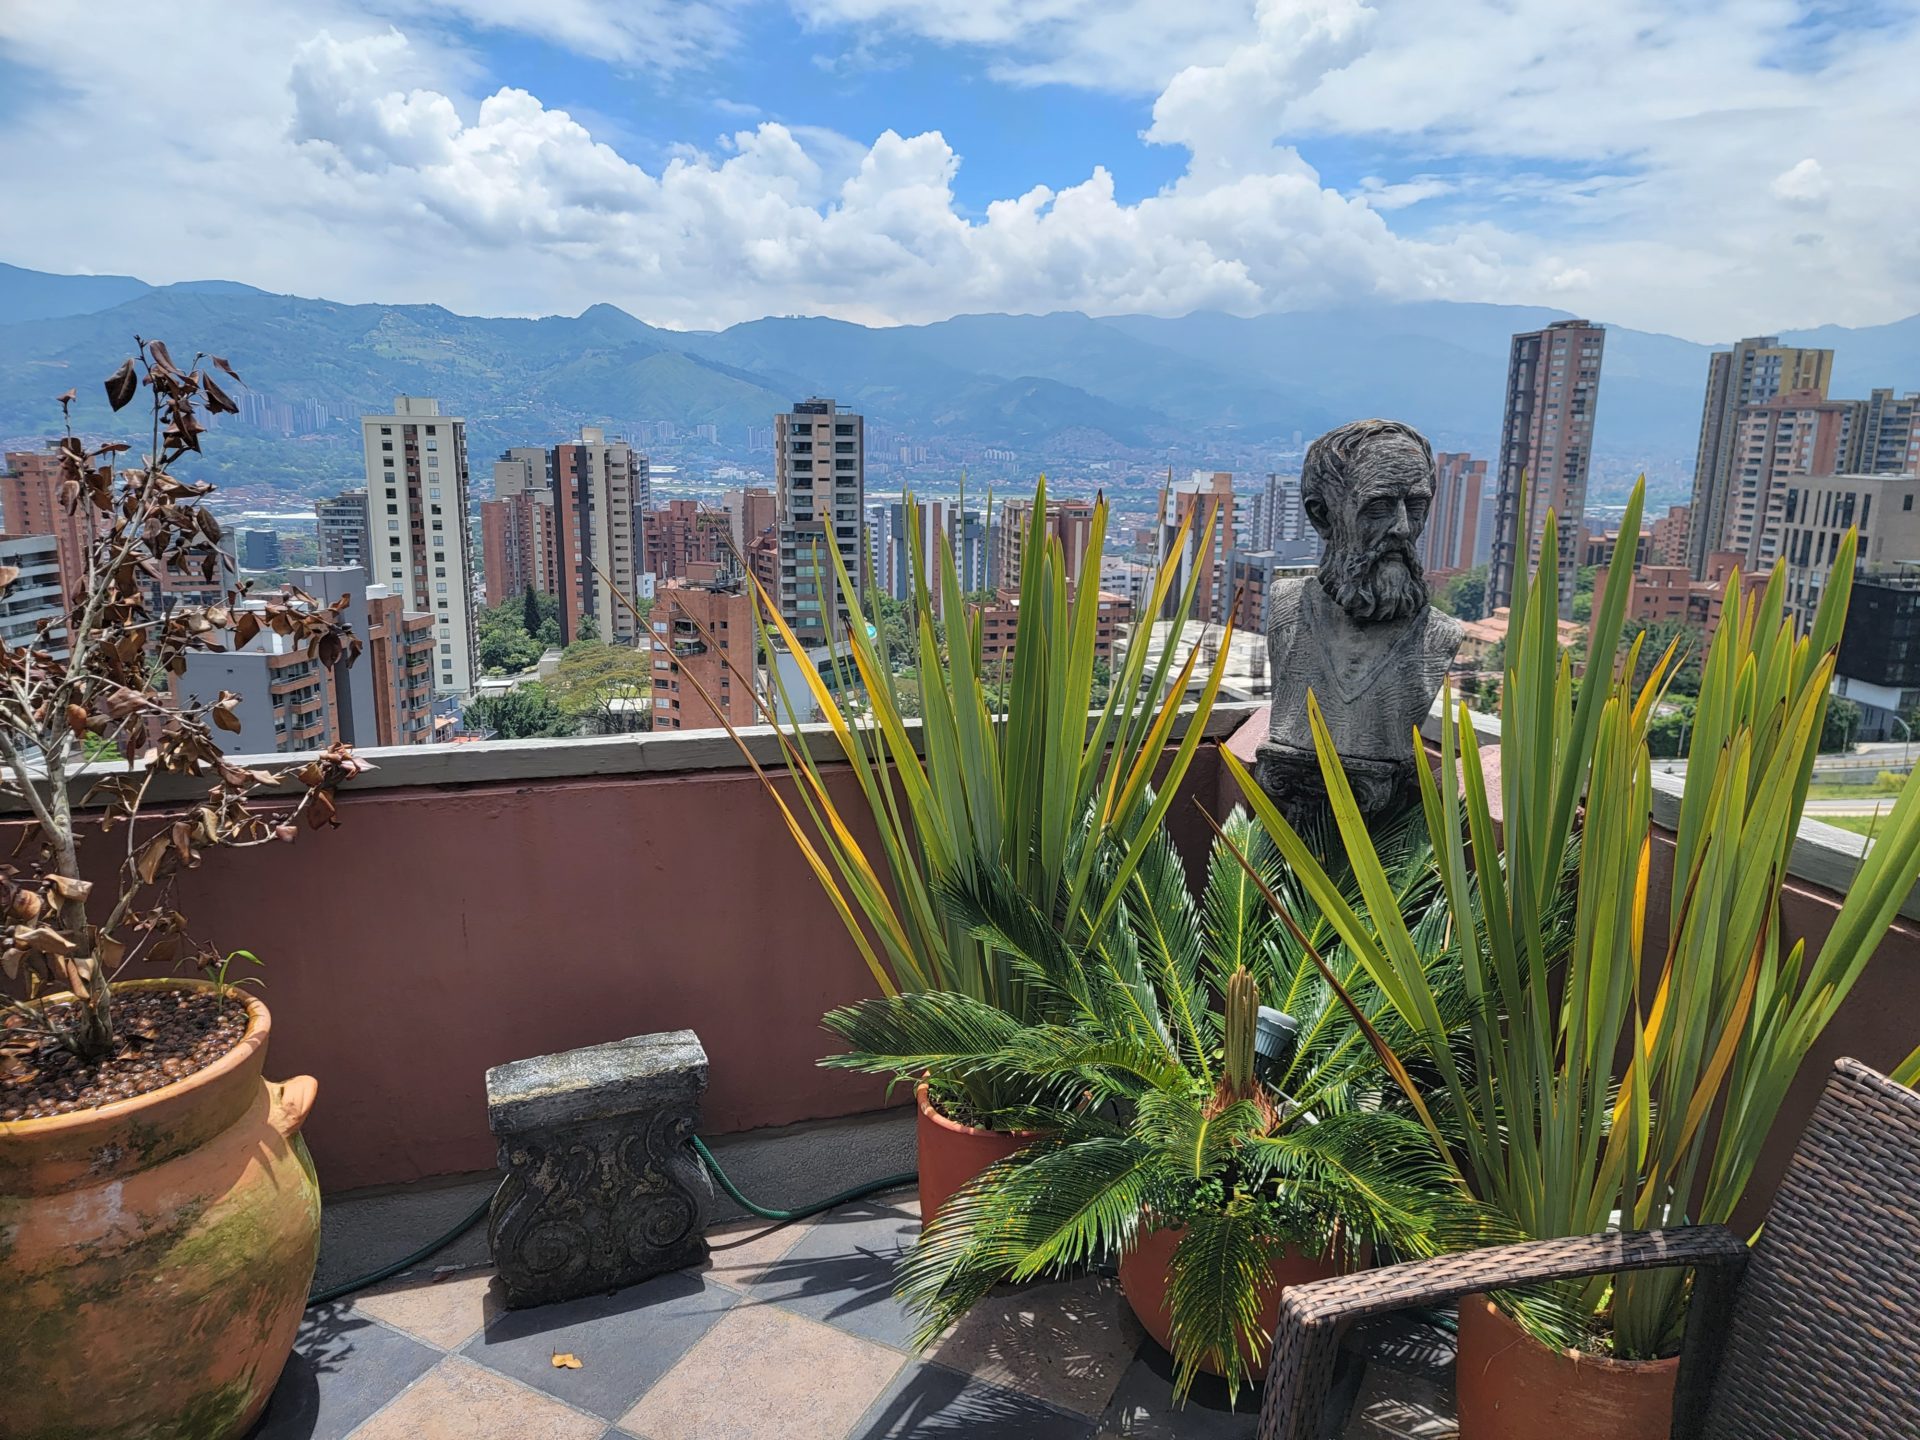 a statue on a rooftop overlooking a city